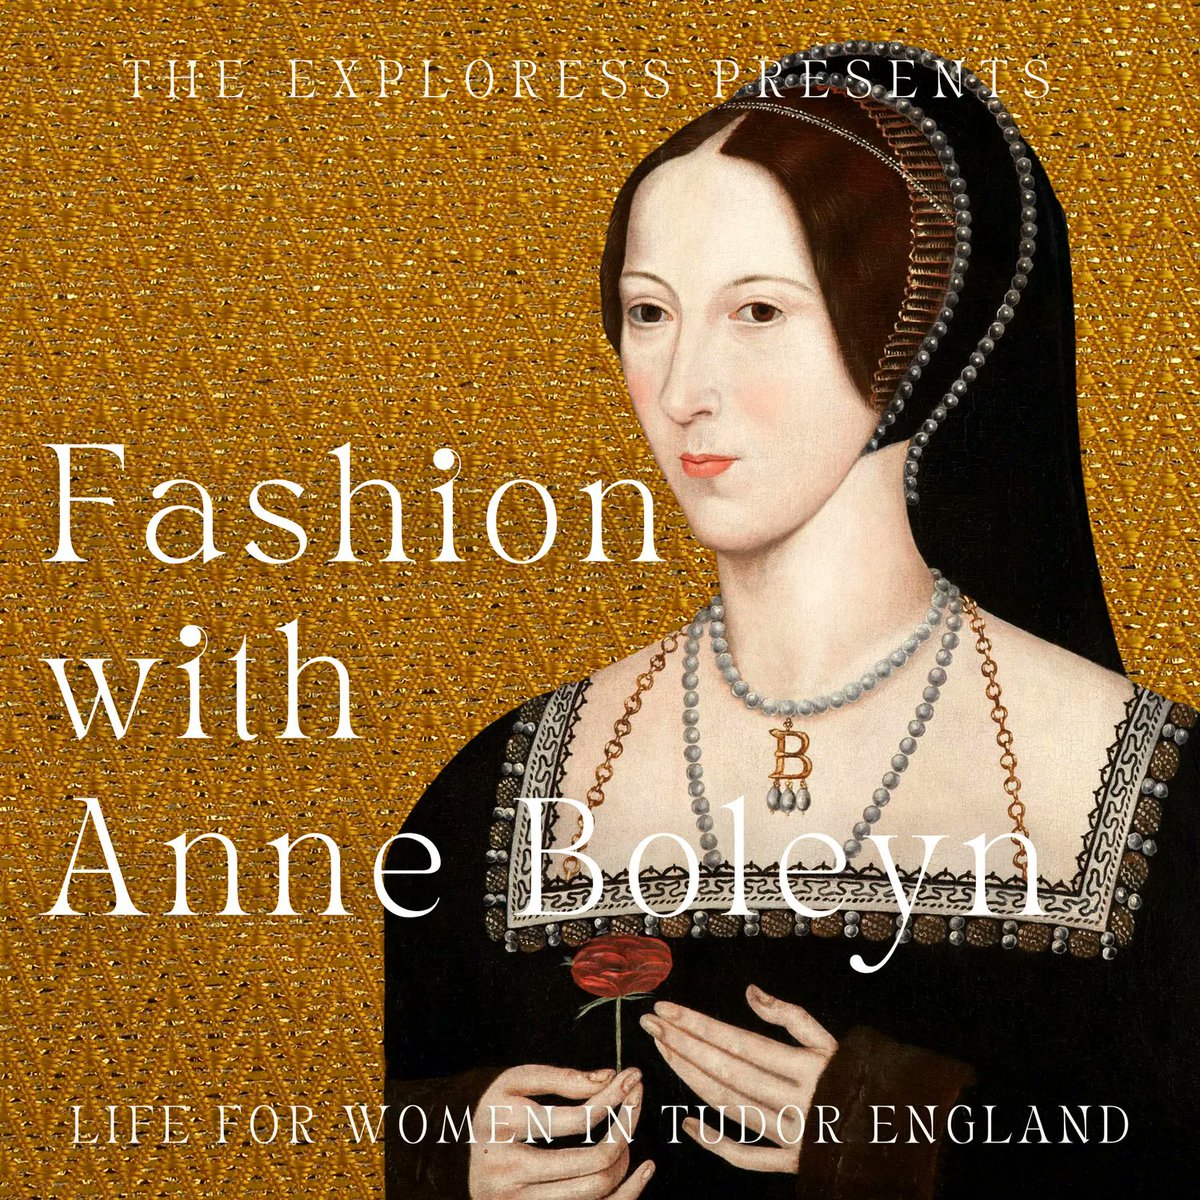 The rumours are true: Anne B has arrived, and she is looking fabulous. Let her be your guide through the wild, sumptuous, and fascinating world of Tudor fashion. buff.ly/3Q91u9w